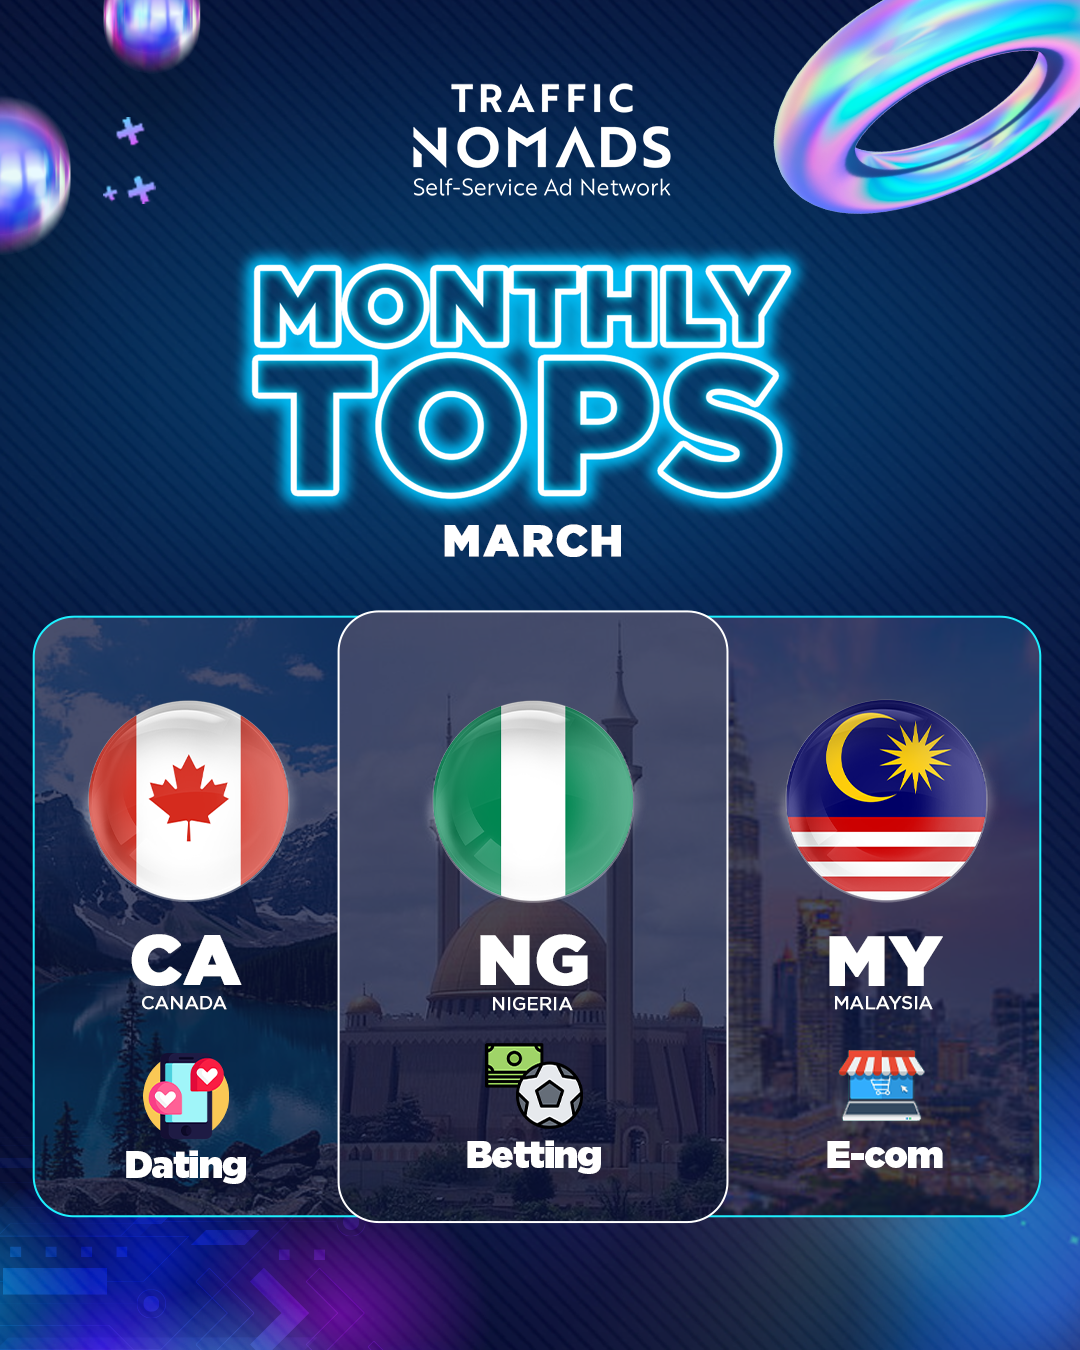 monthly-tops-march-1080x1350-png.49121